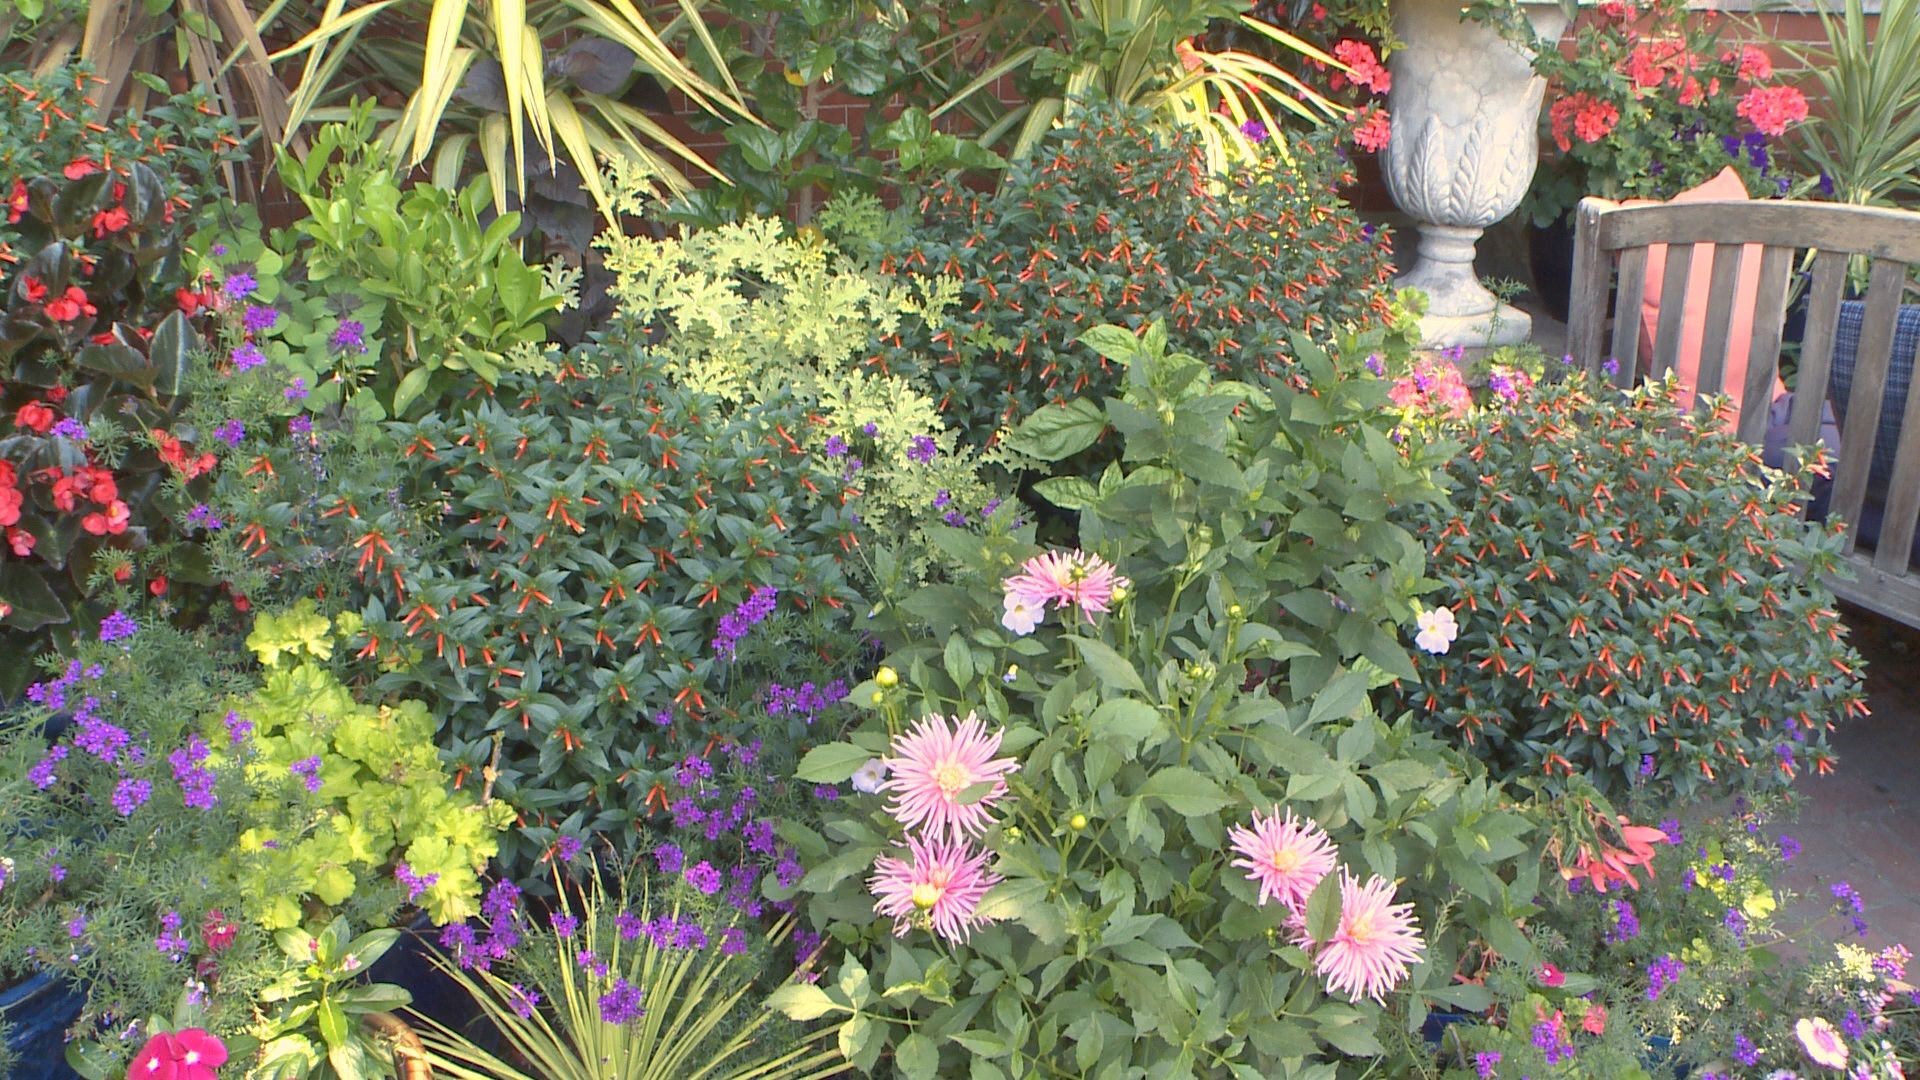 9NEWS Garden Expert Rob Proctor gives tips on how to grow beautiful plants in containers.